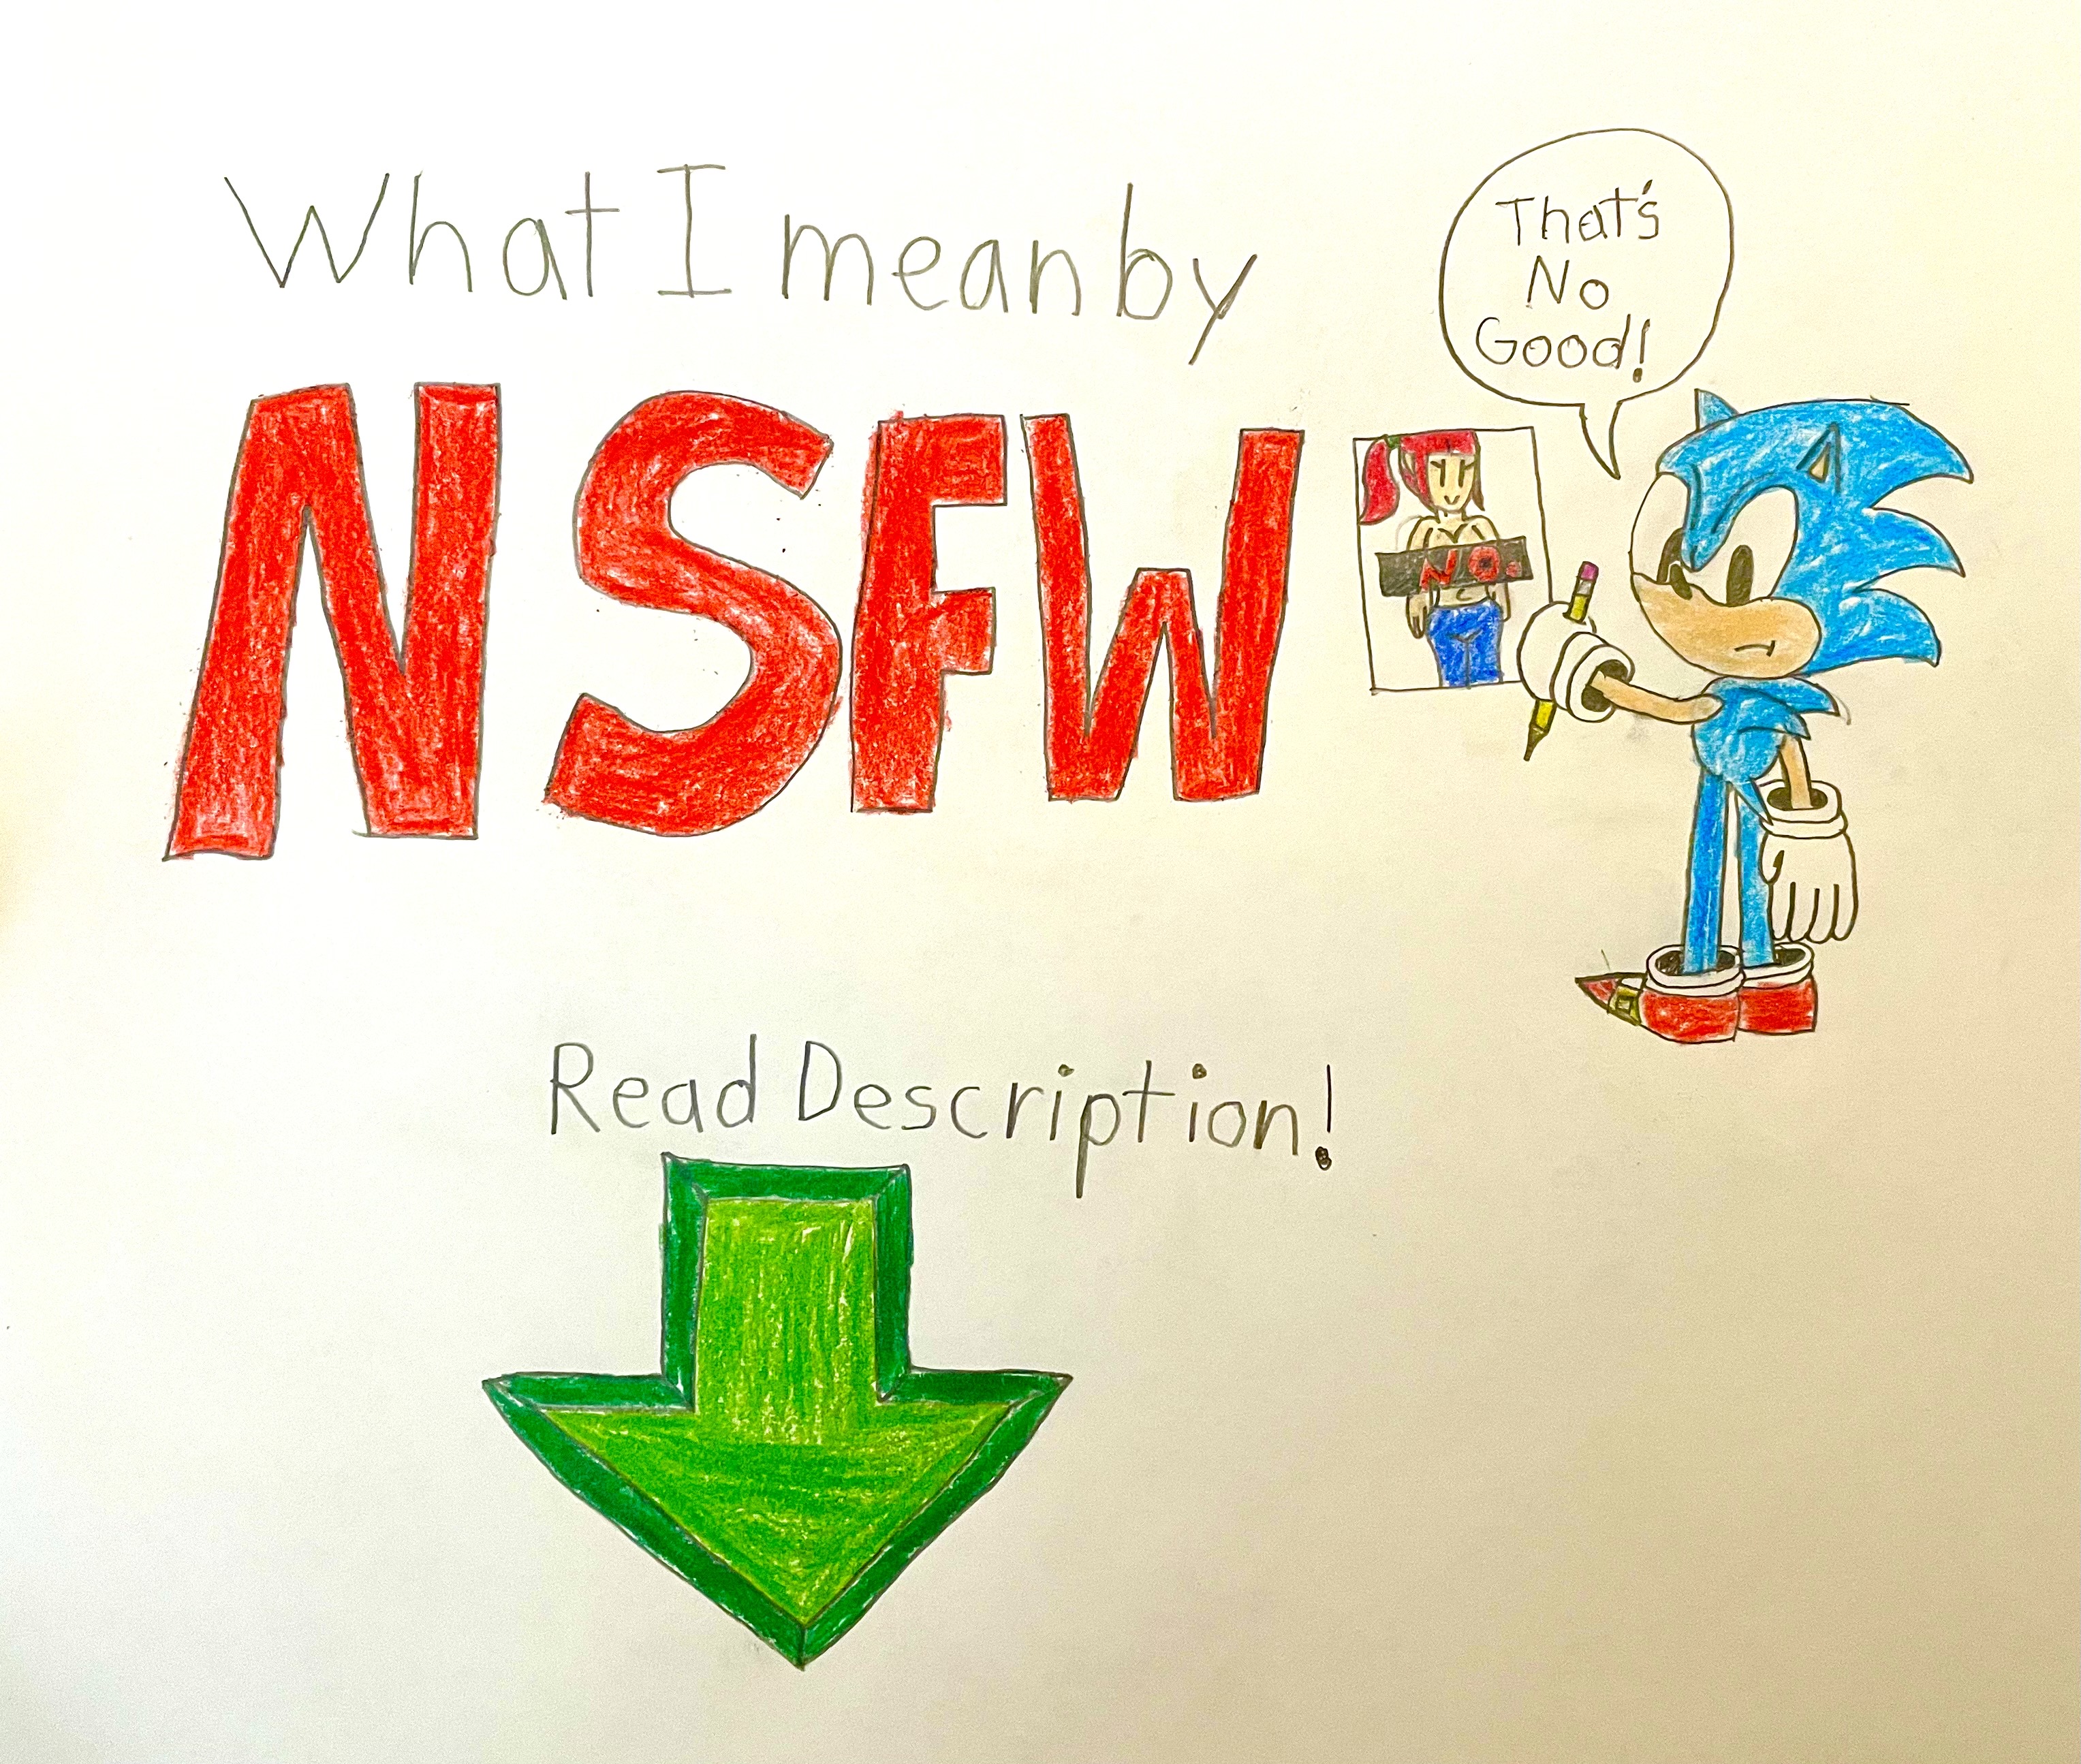 What does NFSW Mean?